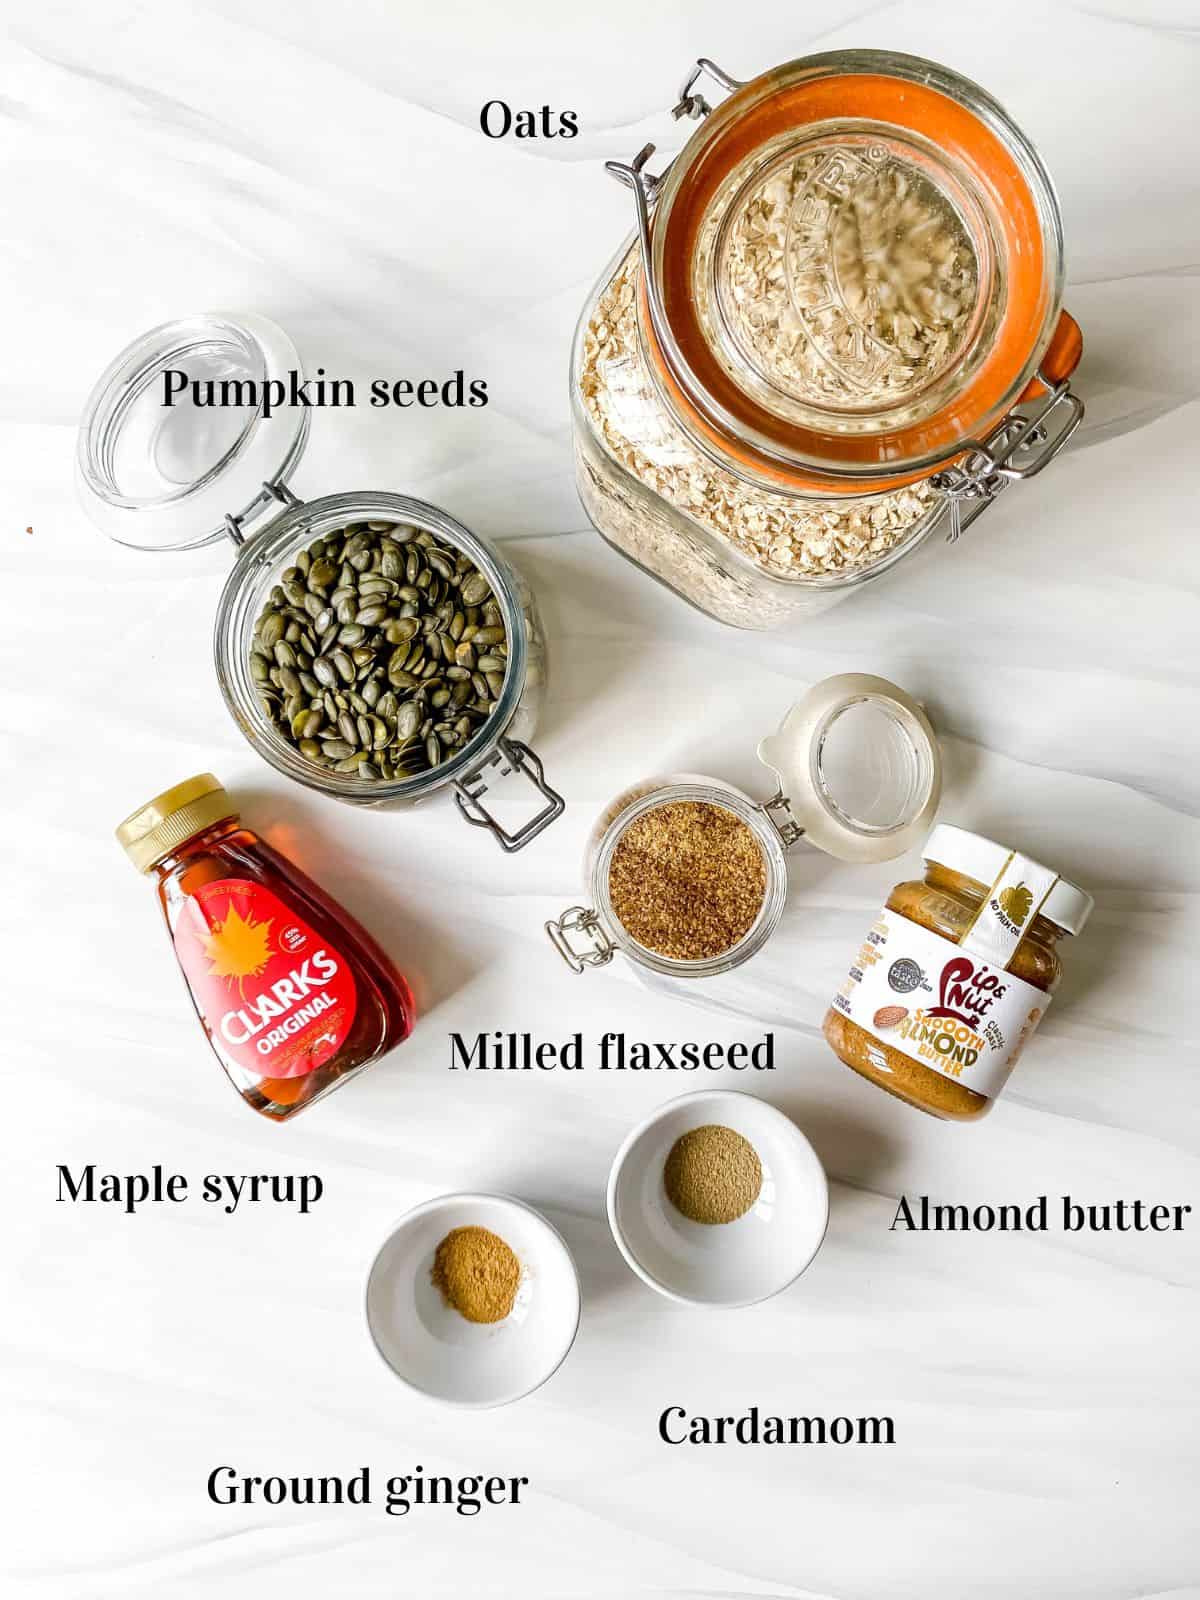 individually labelled ingredients to make cardamom oatmeal cookies including oats, maple syrup and pumpkin seeds.